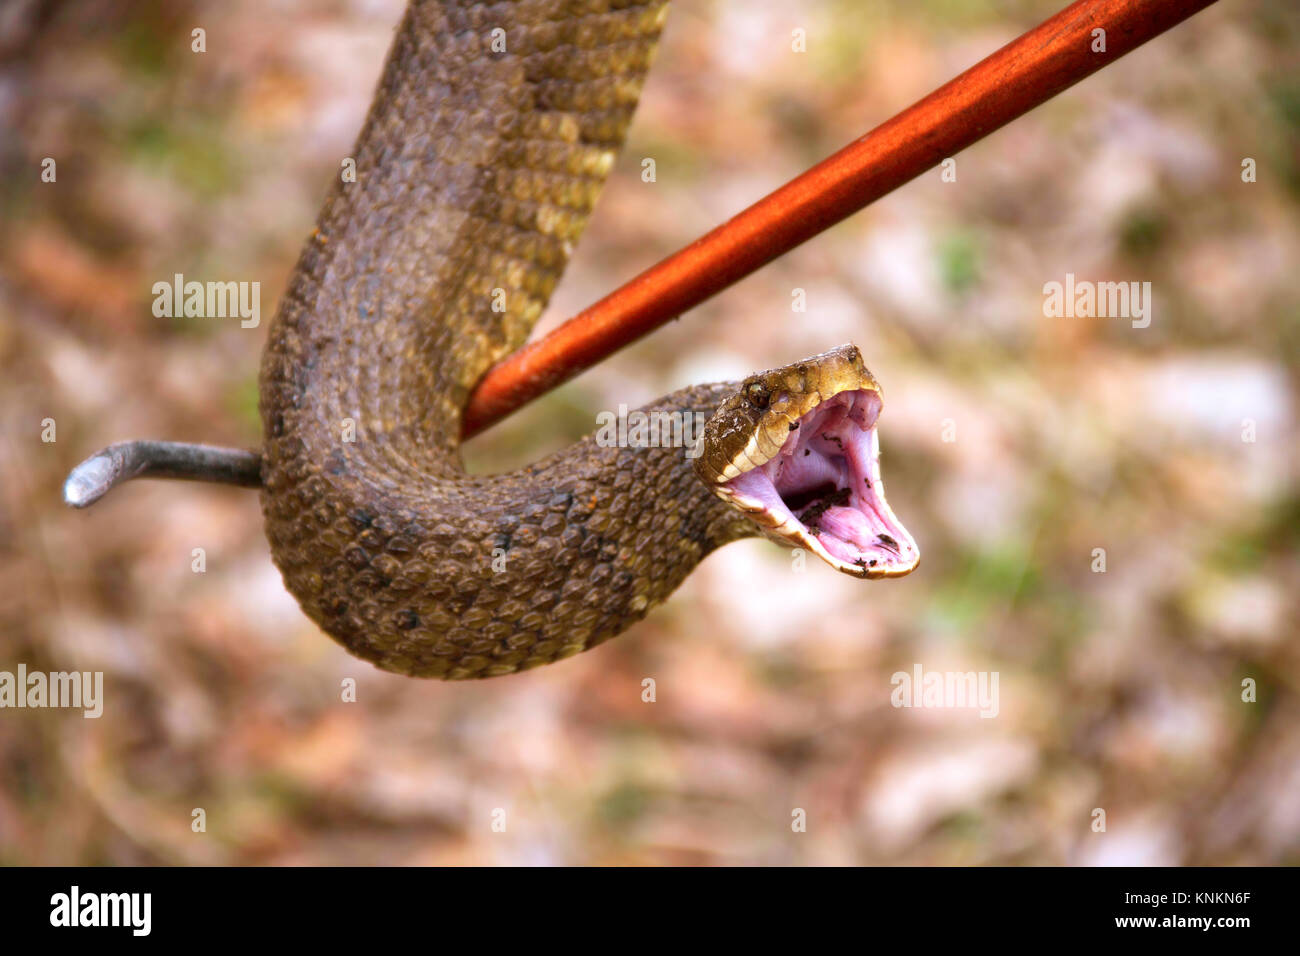 Cottonmouth (Agkistrodon piscivorus) on a snake stick, showing open mouth warning Stock Photo